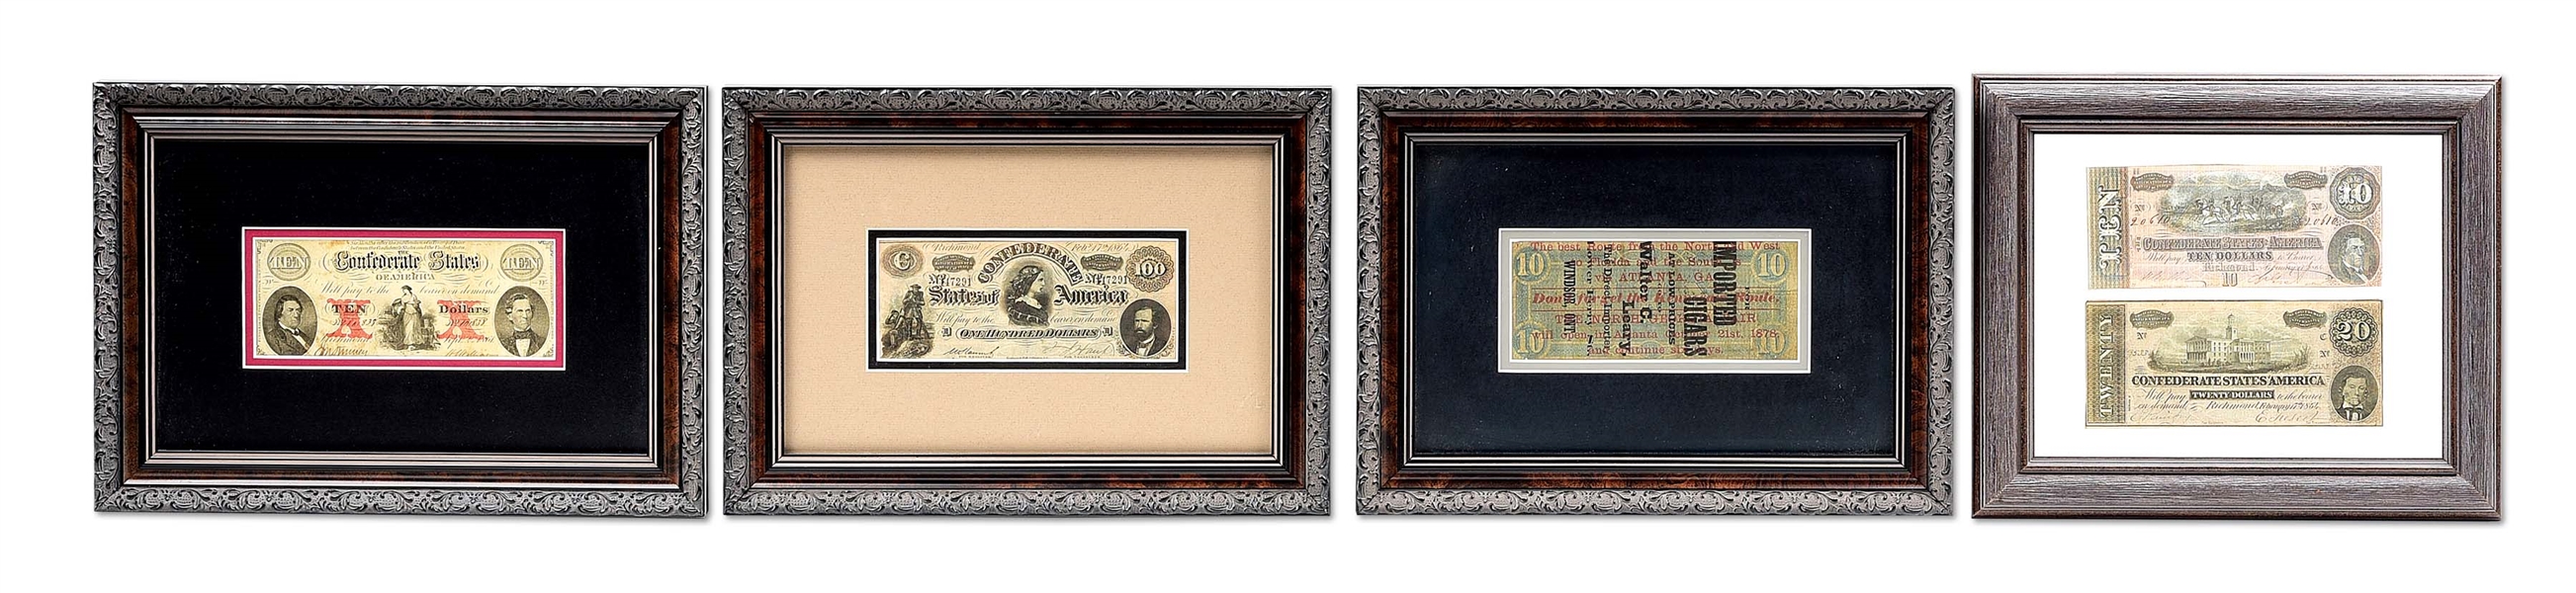 LOT OF 4: FRAMED PIECES OF CONFEDERATE CURRENCY.